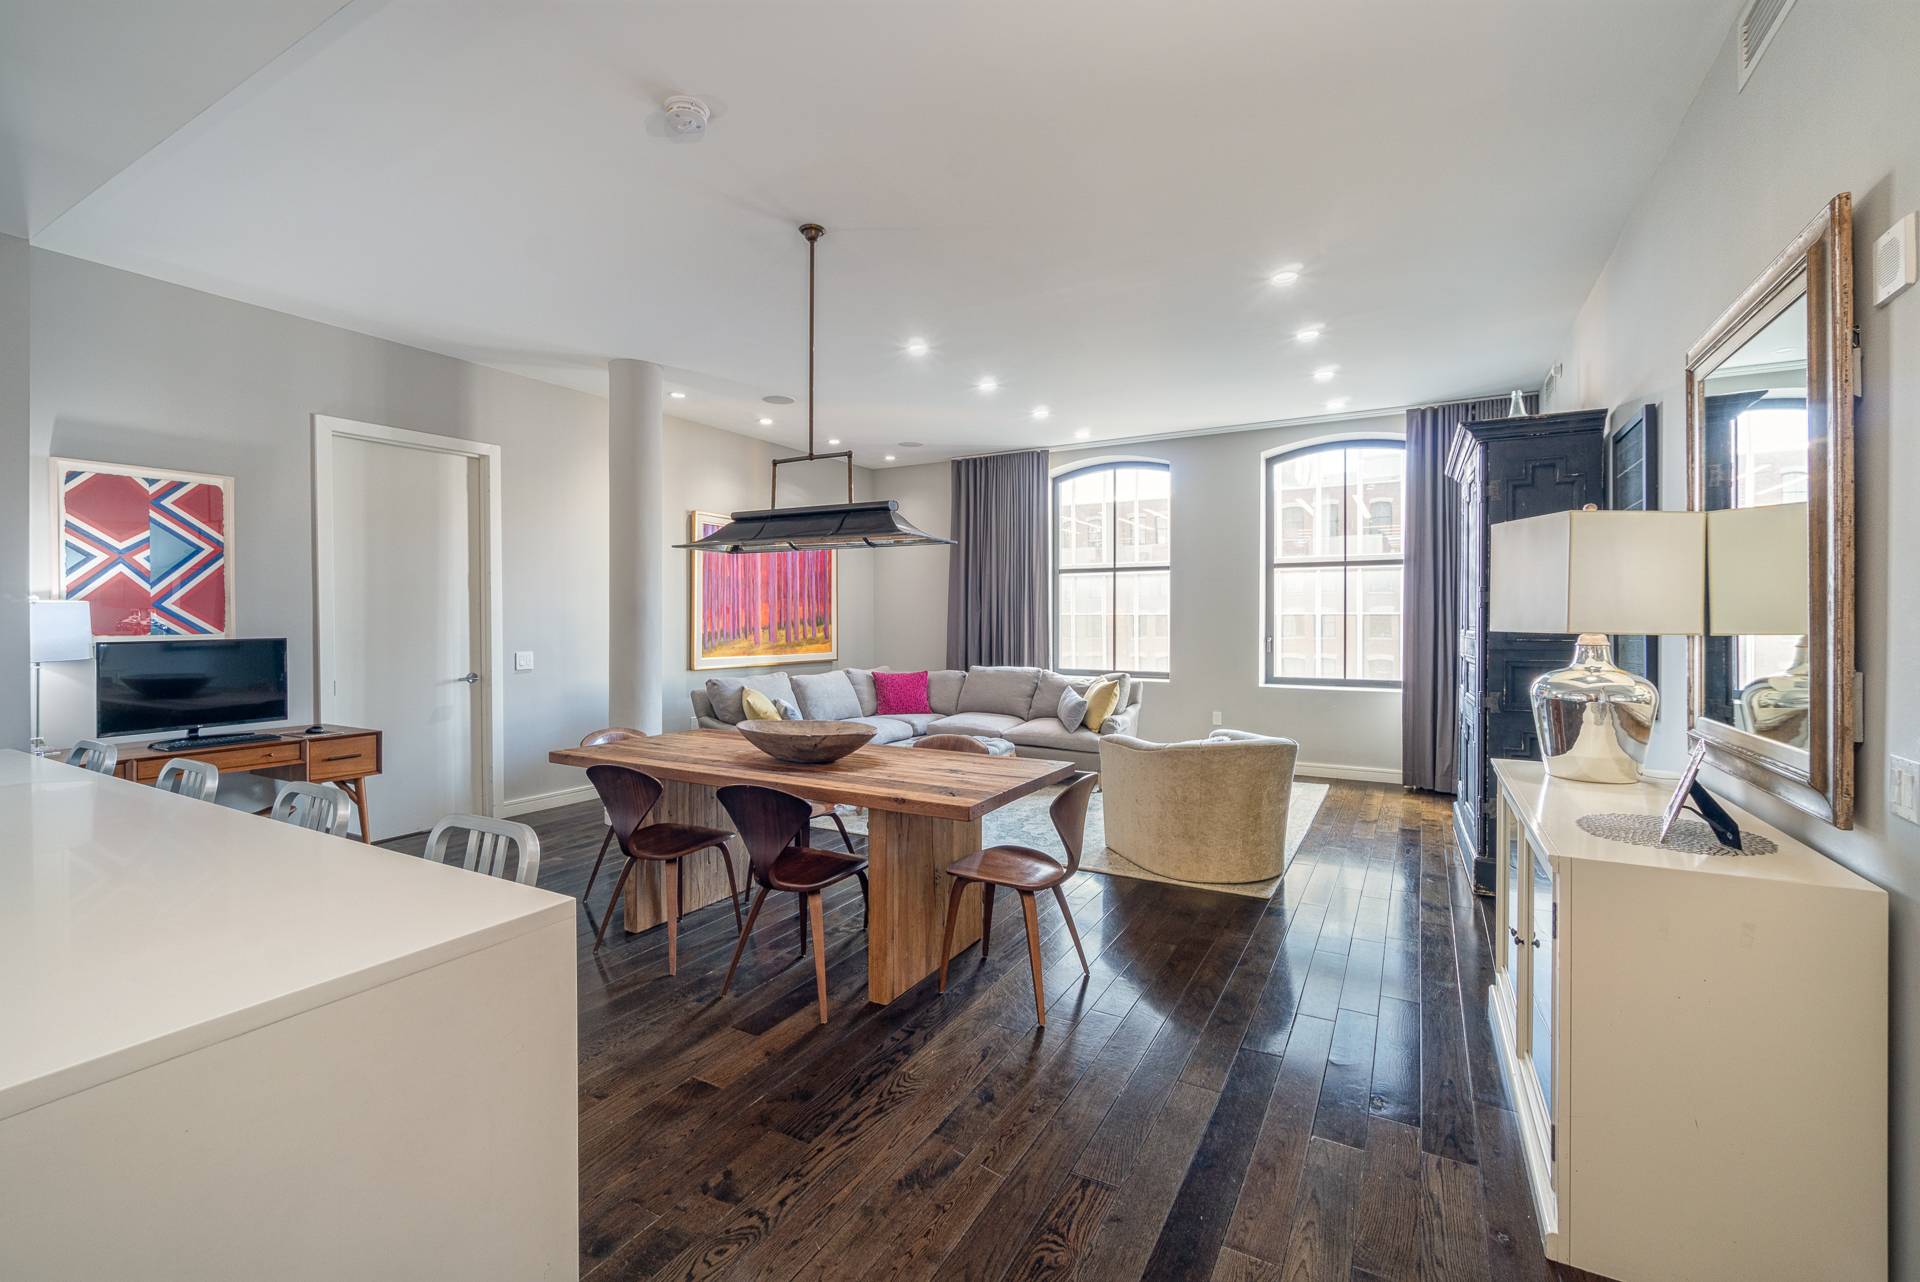 In TriBeCa's landmark historic district, this 2 bedroom, 3 bathroom, luxury home with an office is spectacular with a great layout and modern finishes.